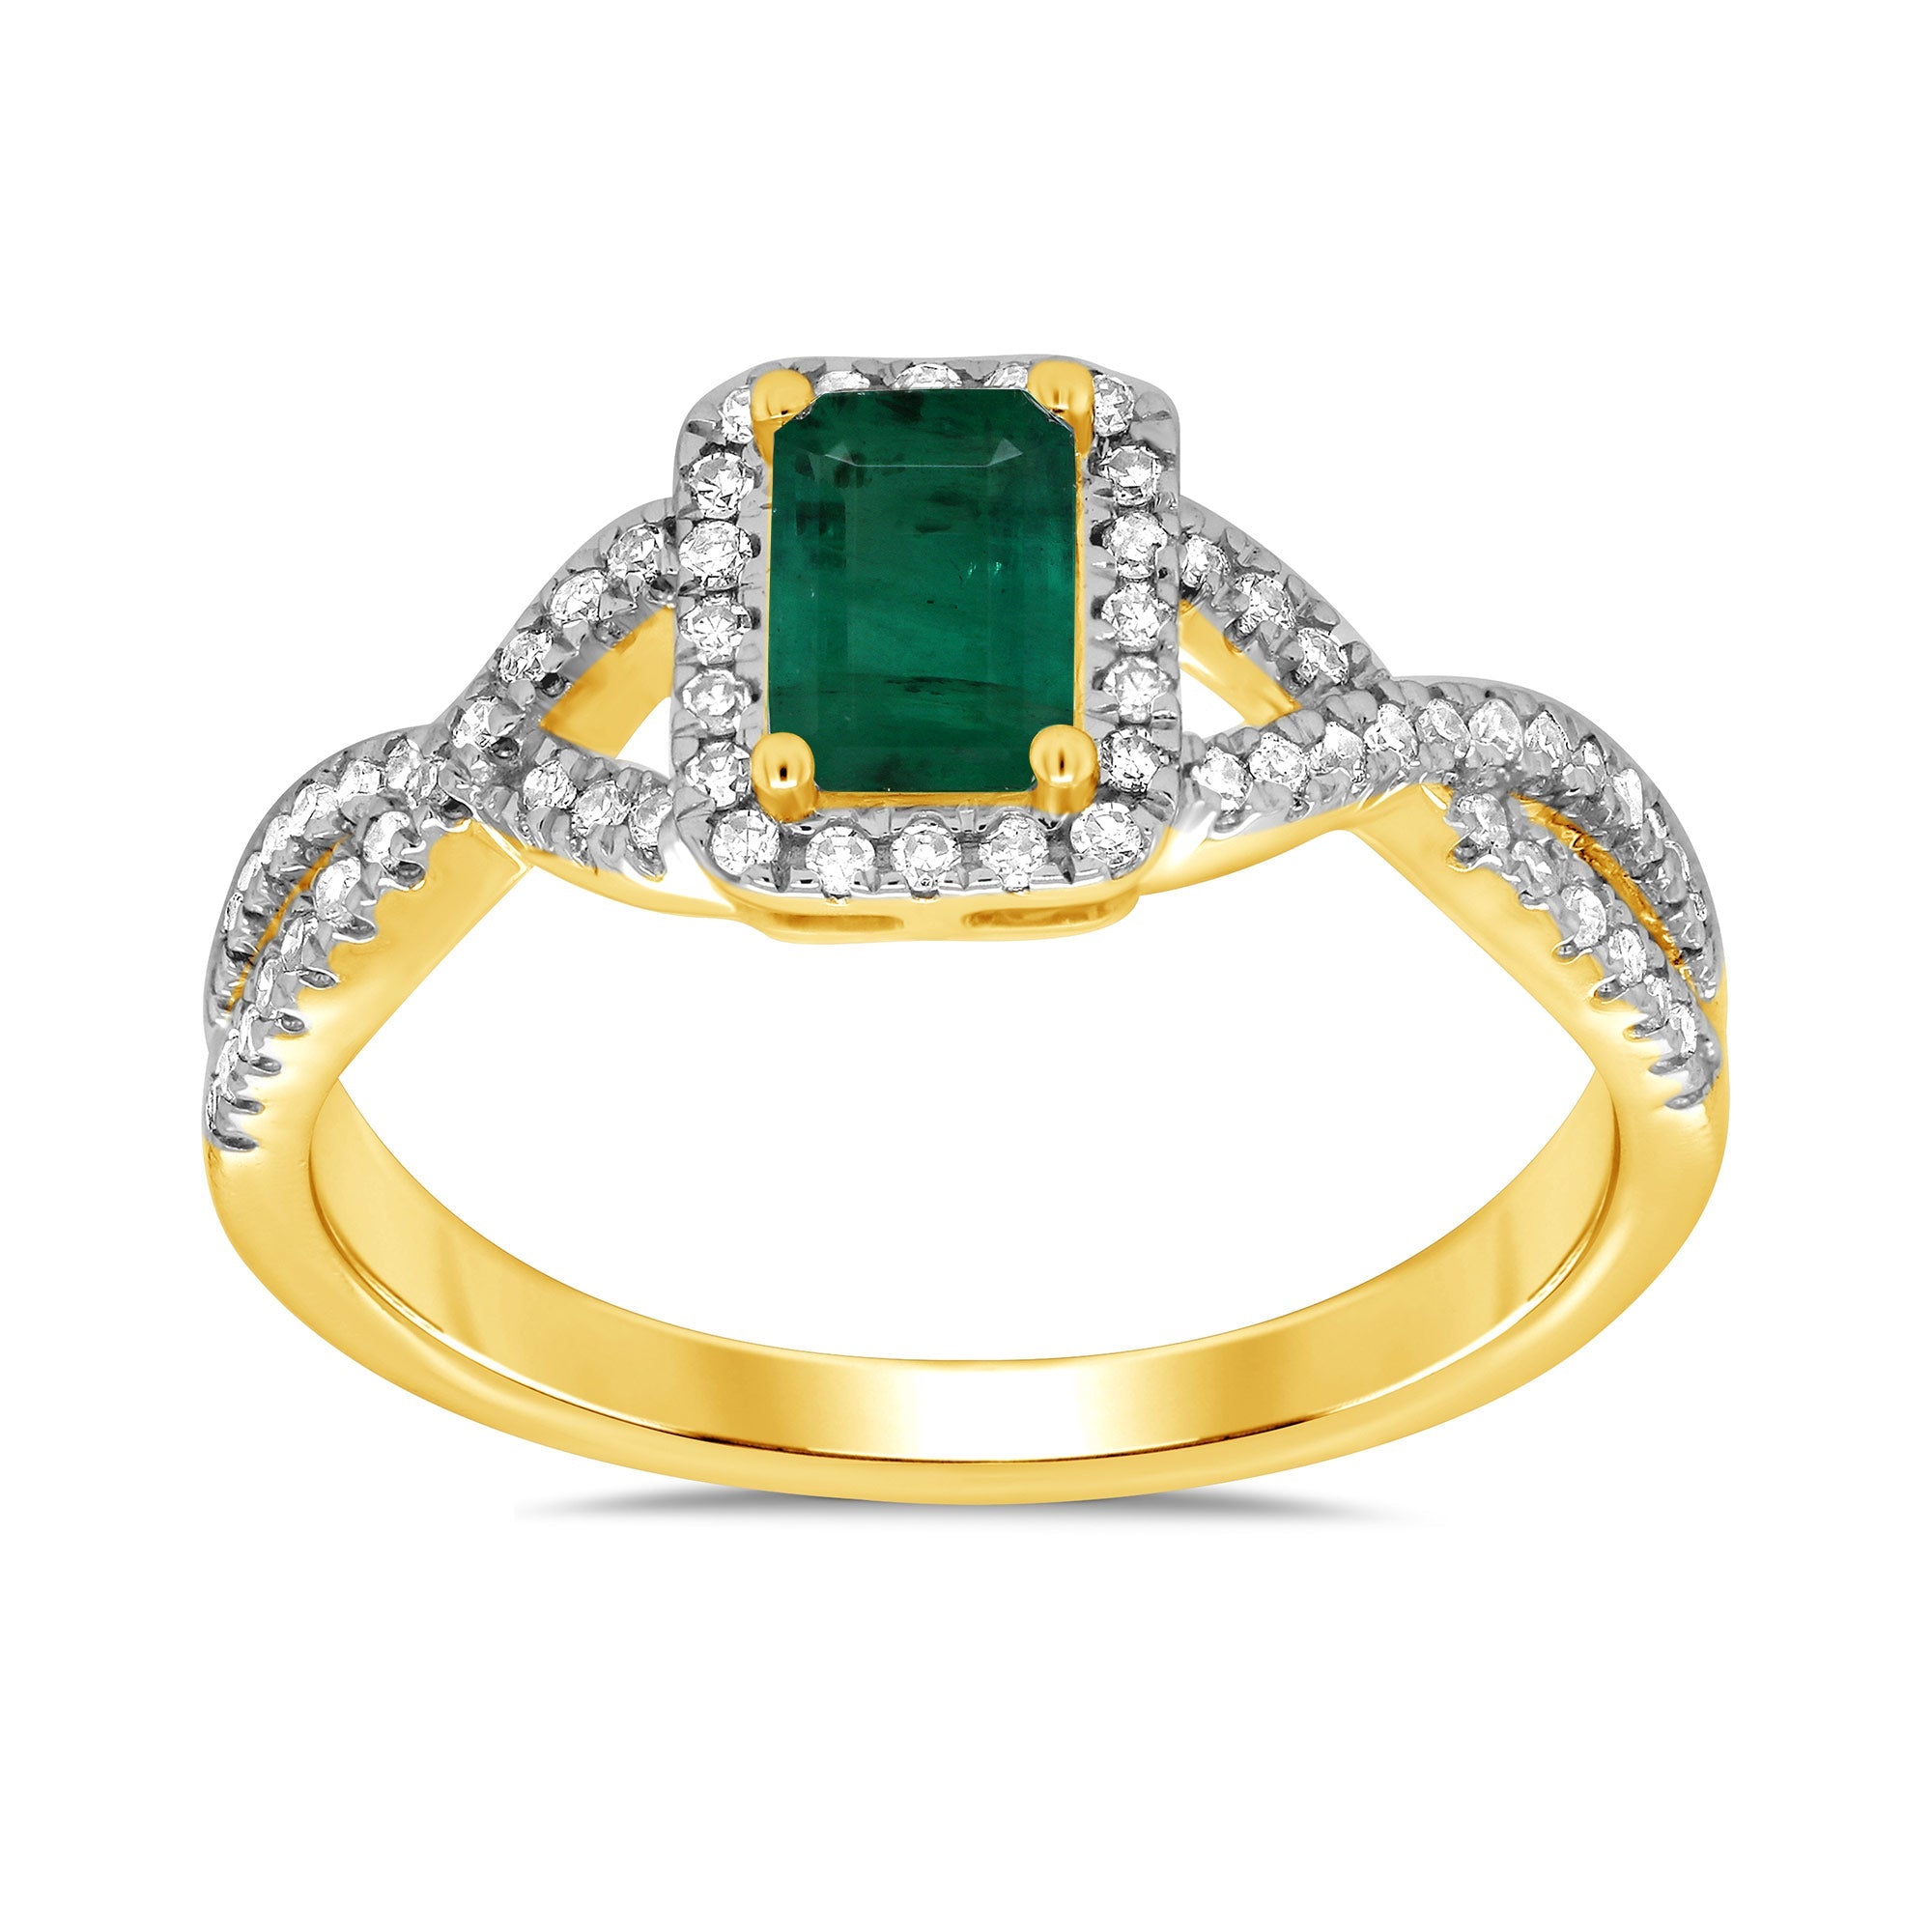 9ct gold 6x4mm octagon cut emerald & diamond cluster ring with diamond set crossover shoulders 0.21ct